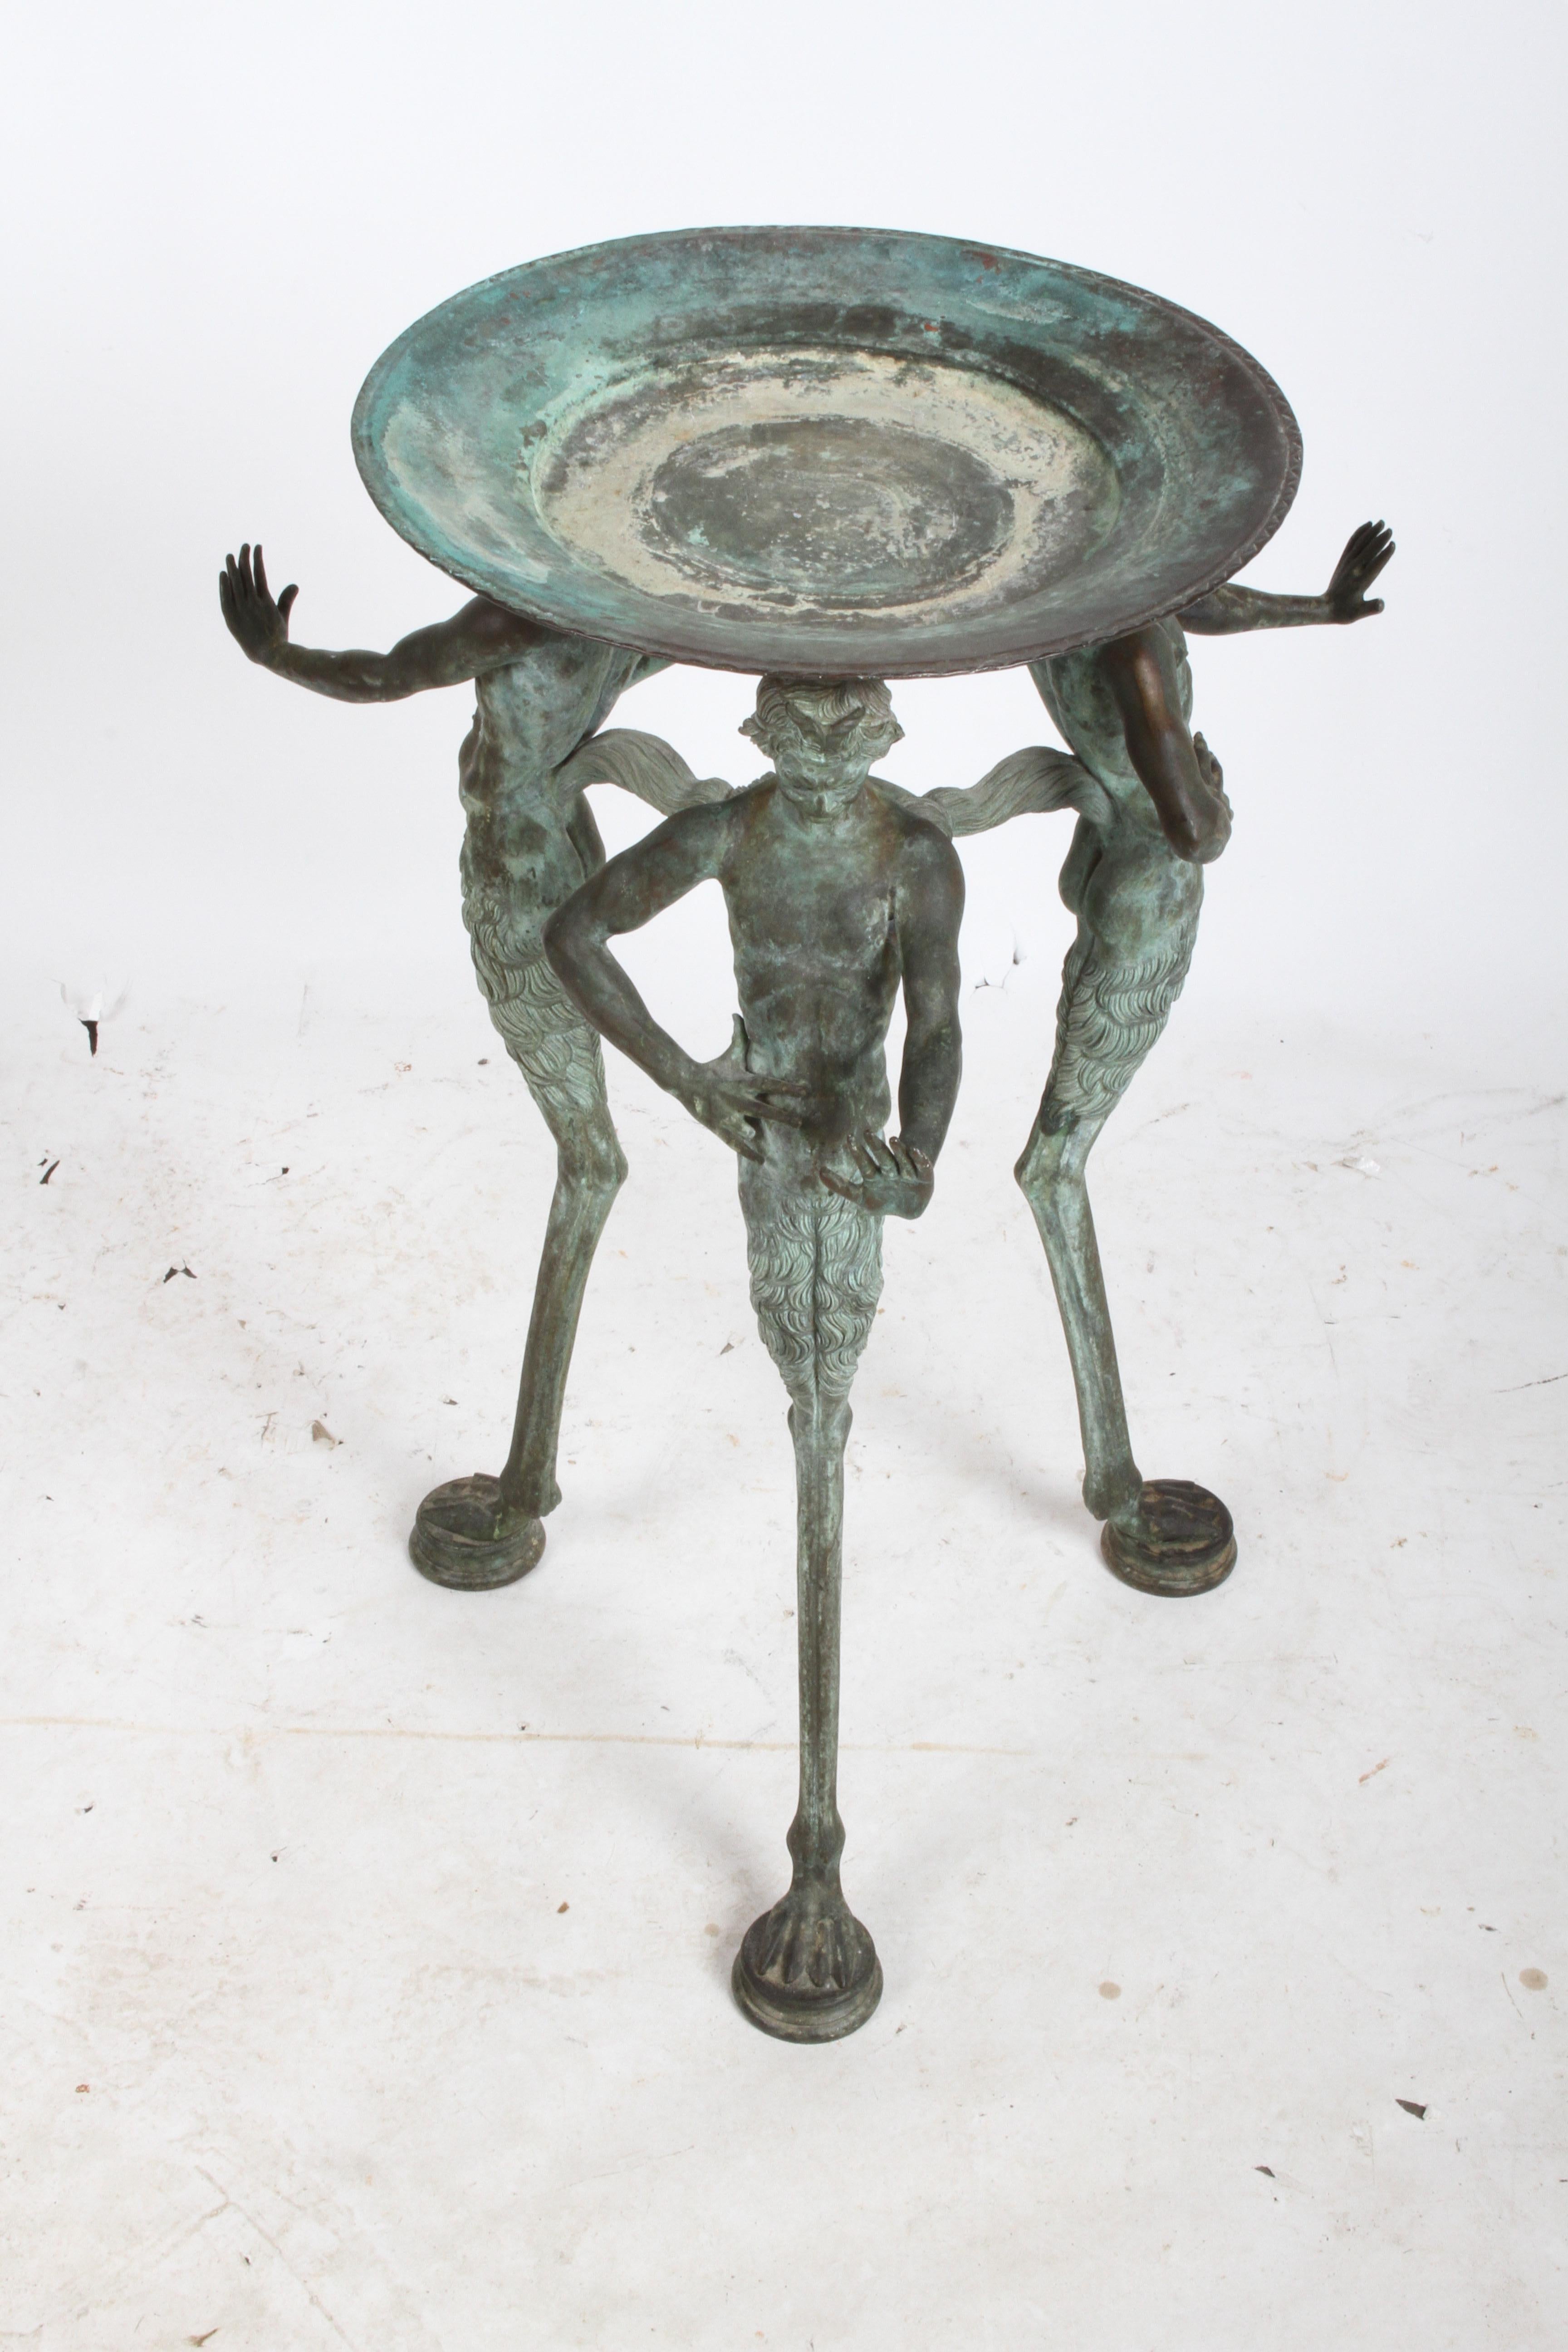 Late 19th or early 20th century antique Italian bronze Etruscan Tripod jardinière with satyrs or pan figures, after the Roman antique 